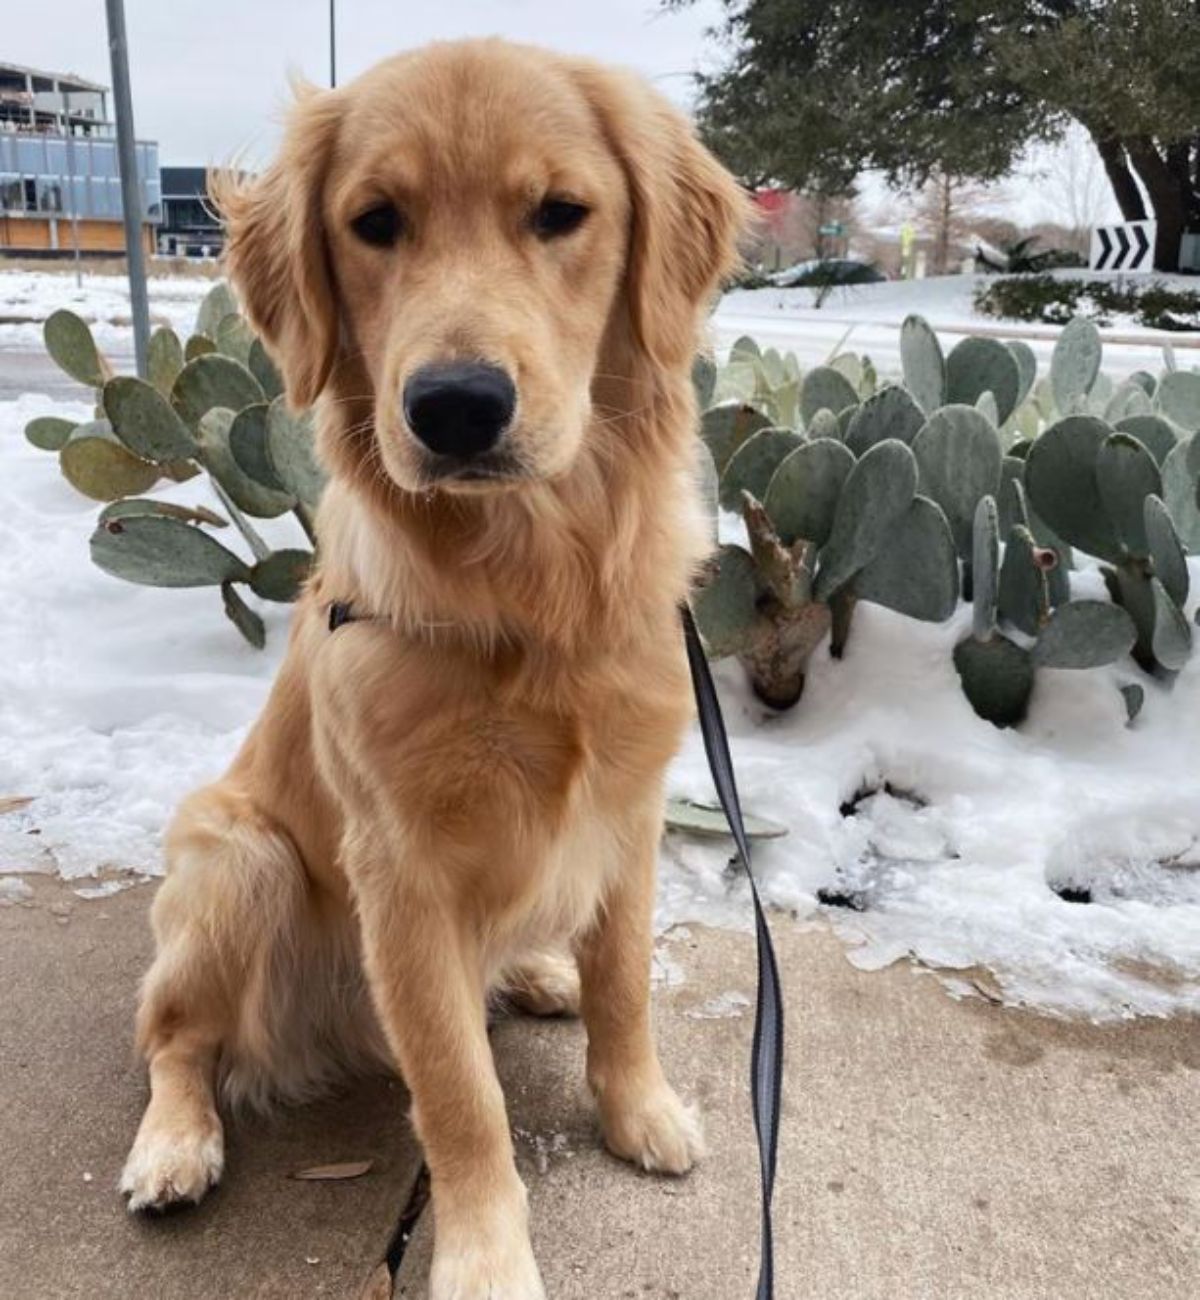 golden retriever on a leash sitting on sand next to a snowy area with cacti plants